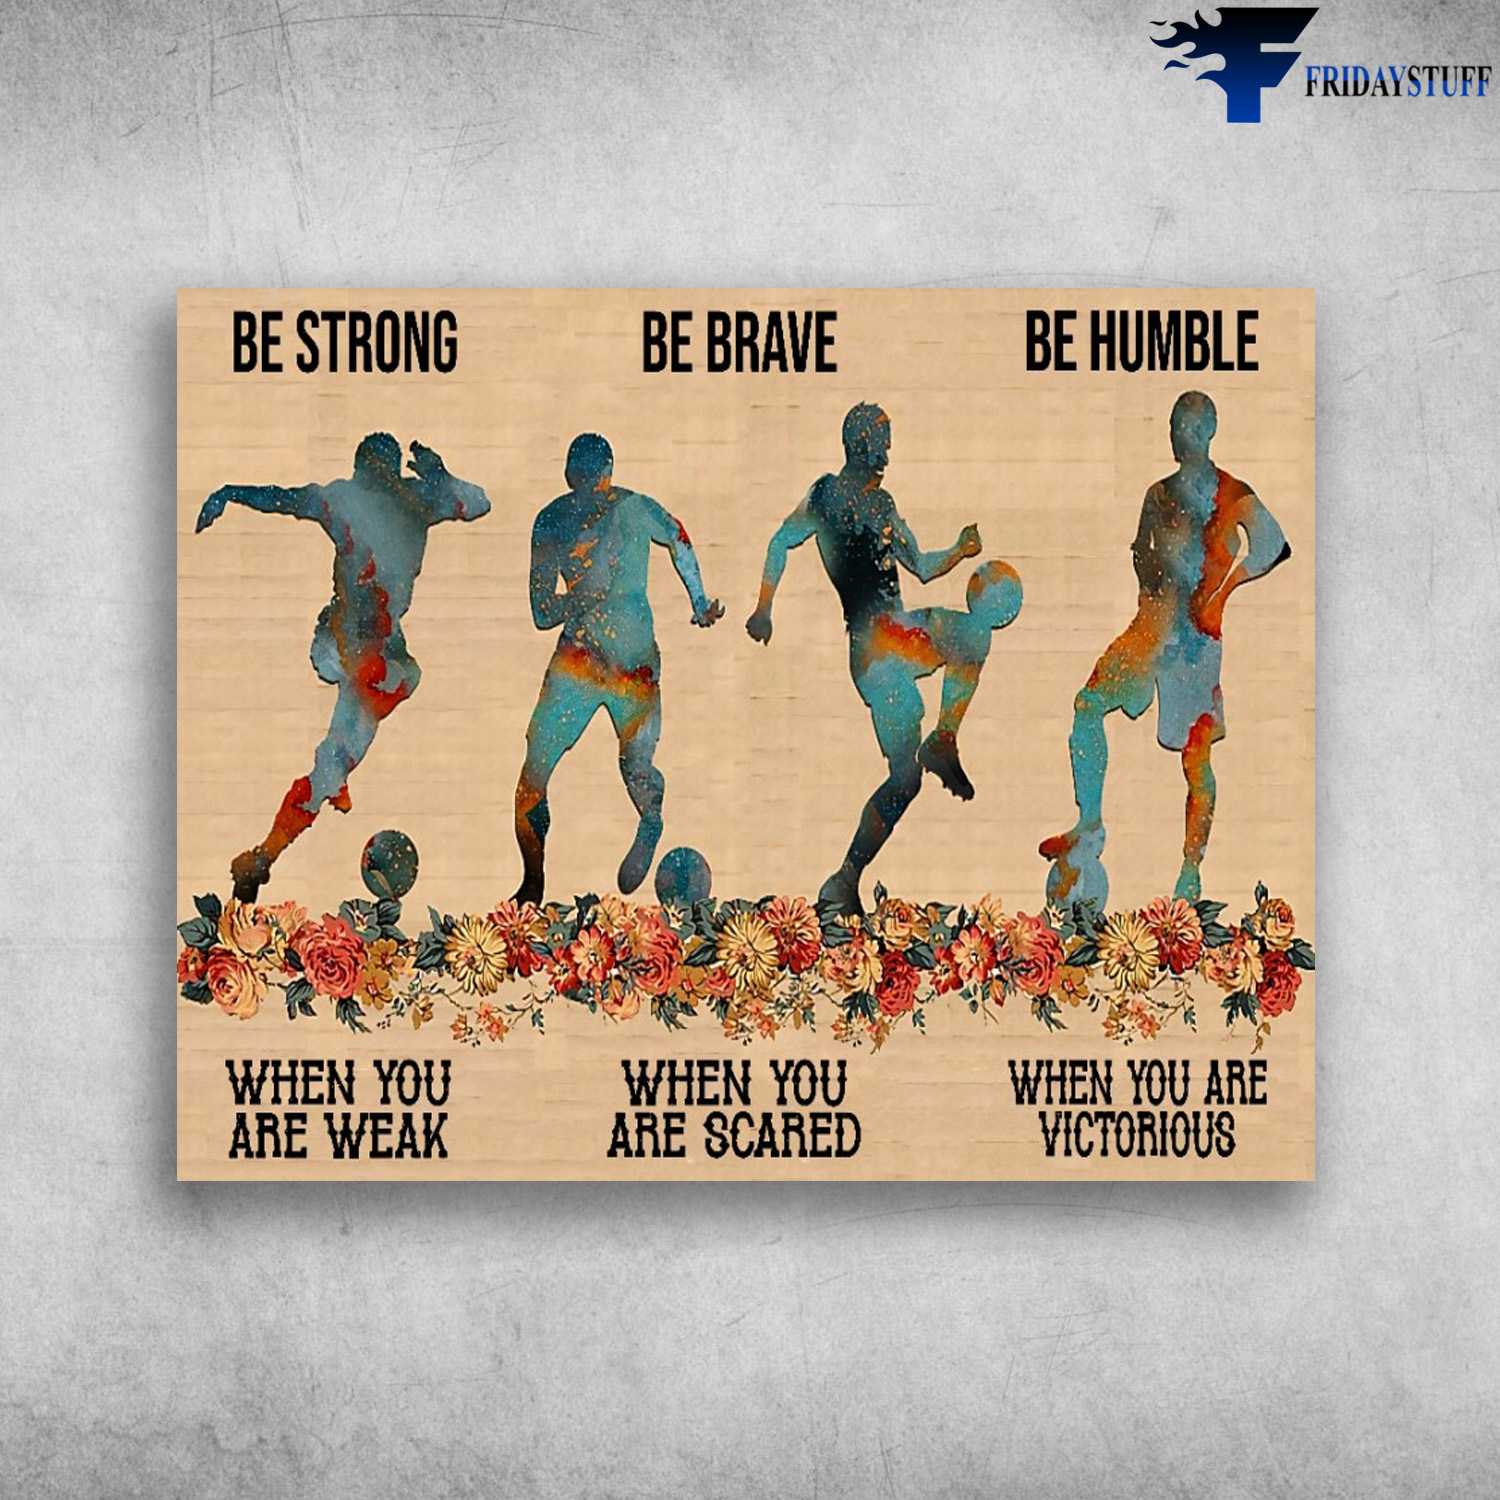 Soccer Player, Soccer Lover, Be Strong When You Are Weak, Be Brave When You Are Scared, Be Humble When You Are Victorious